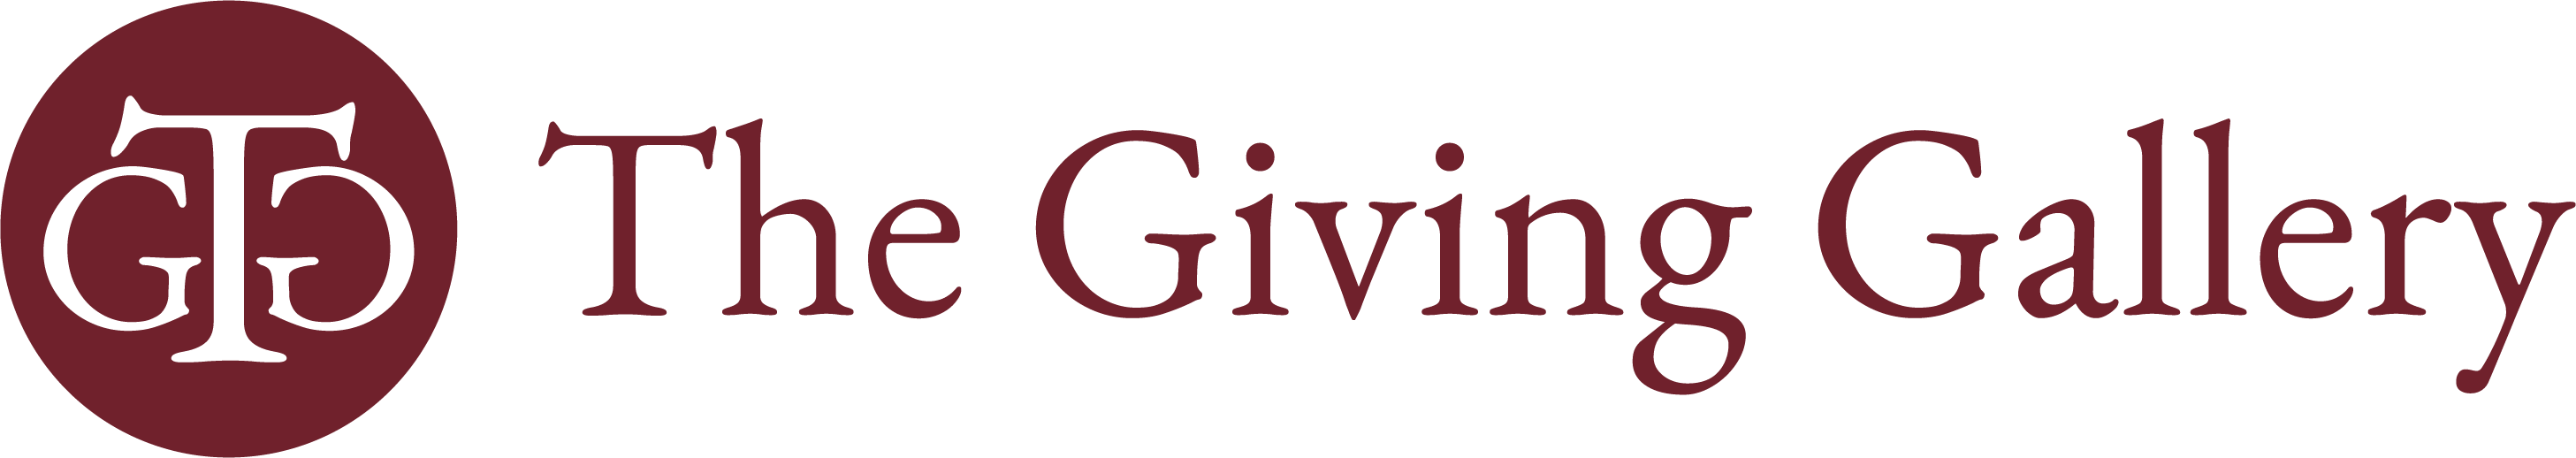 The Giving Gallery Logo